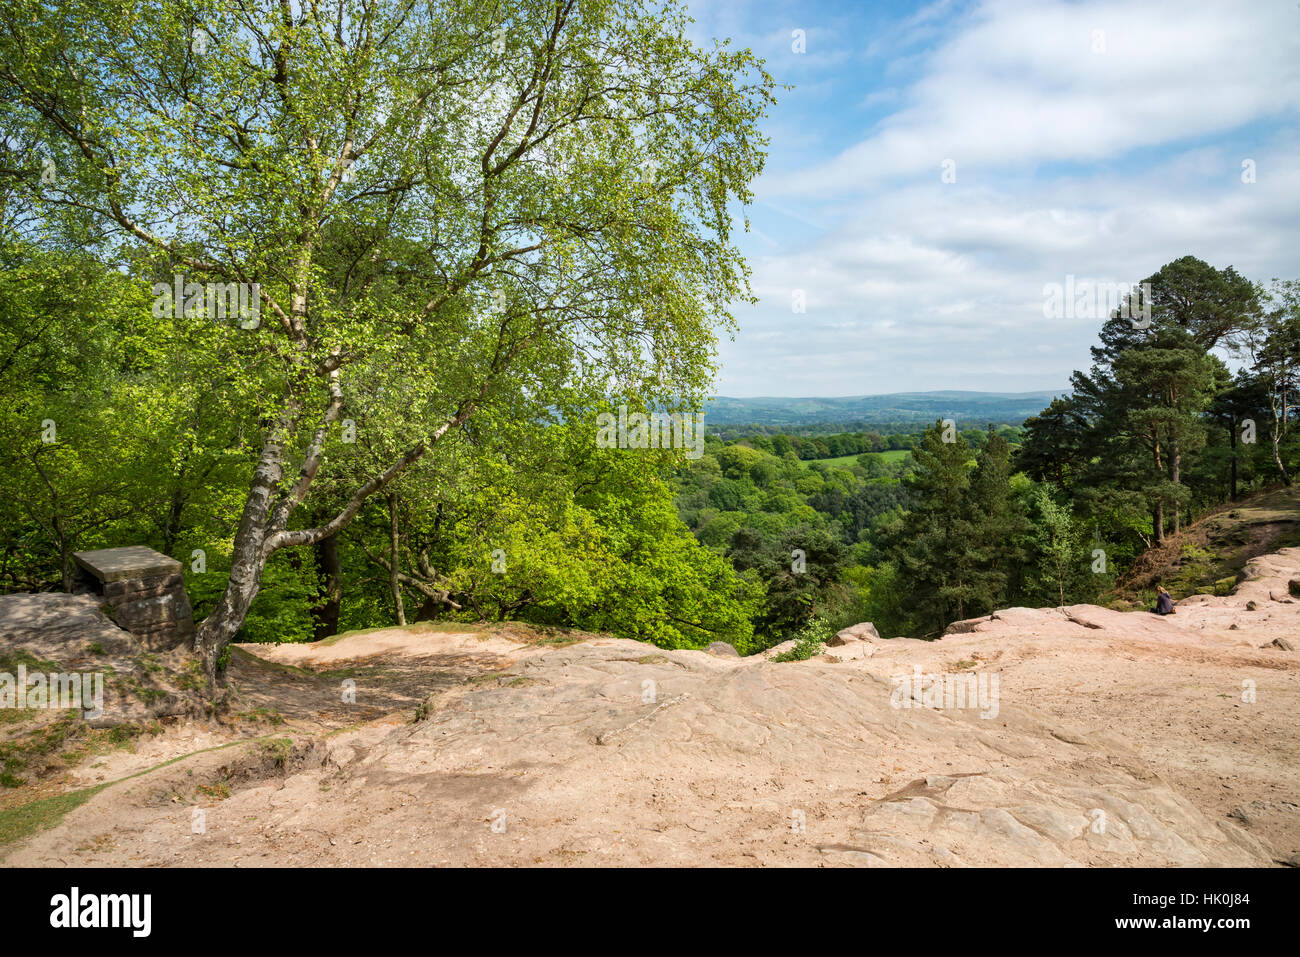 Stormy point at Alderley edge, Cheshire, England. A popular viewpoint with views of the Cheshire countryside. Stock Photo